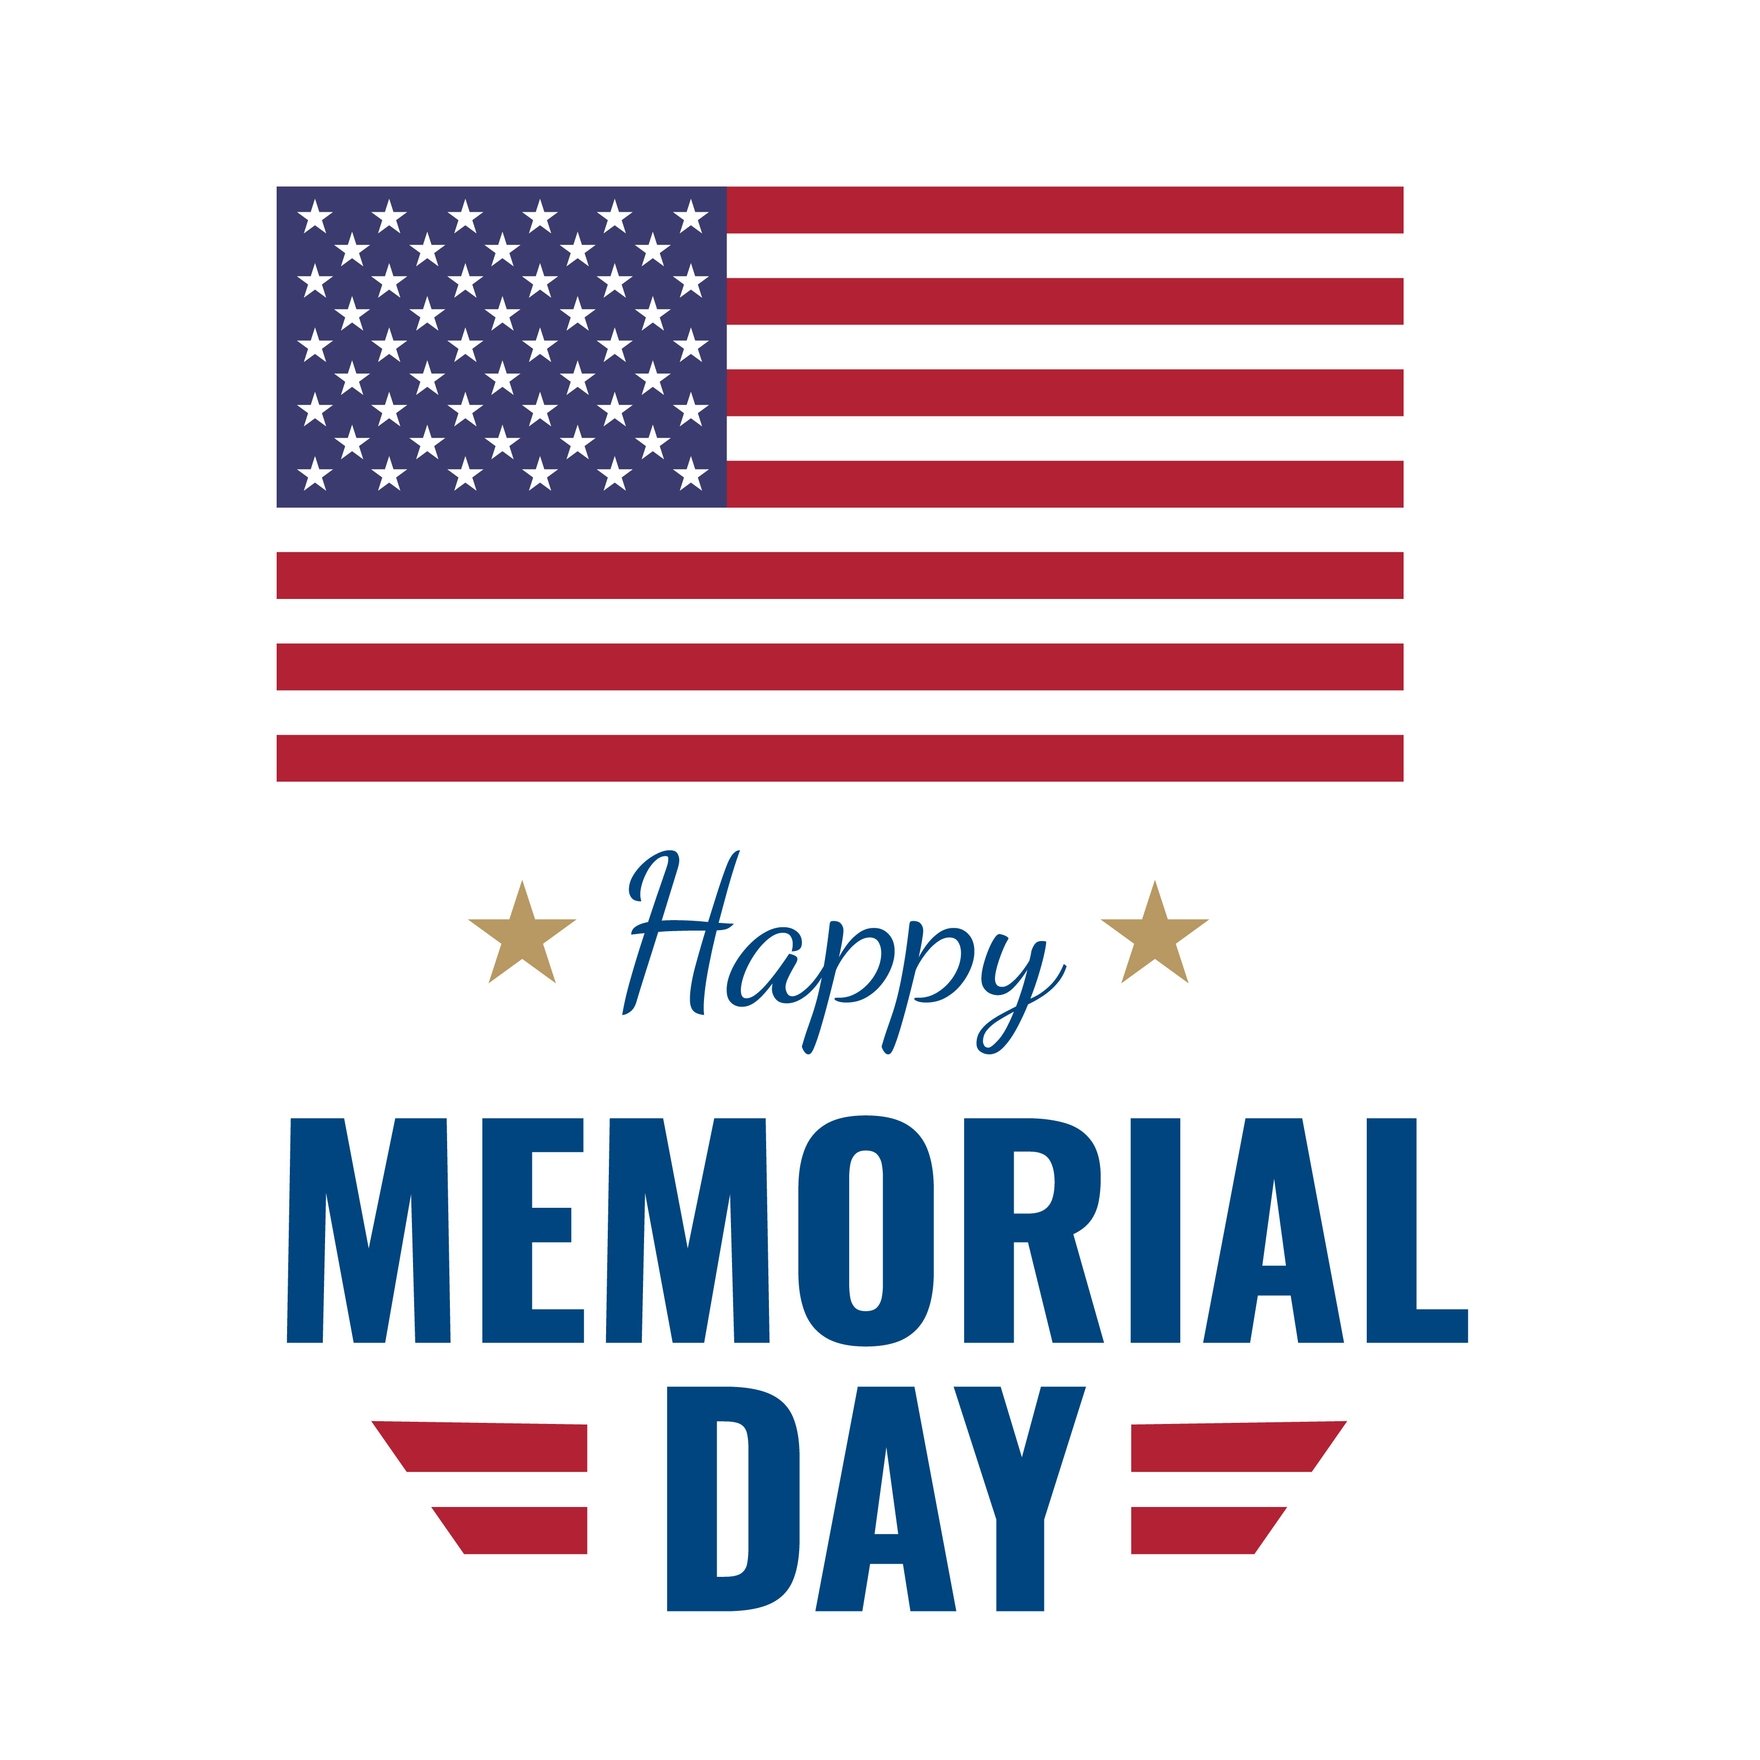 Free Happy Memorial Day Gif in Illustrator, EPS, SVG, JPG, GIF, PNG, After Effects